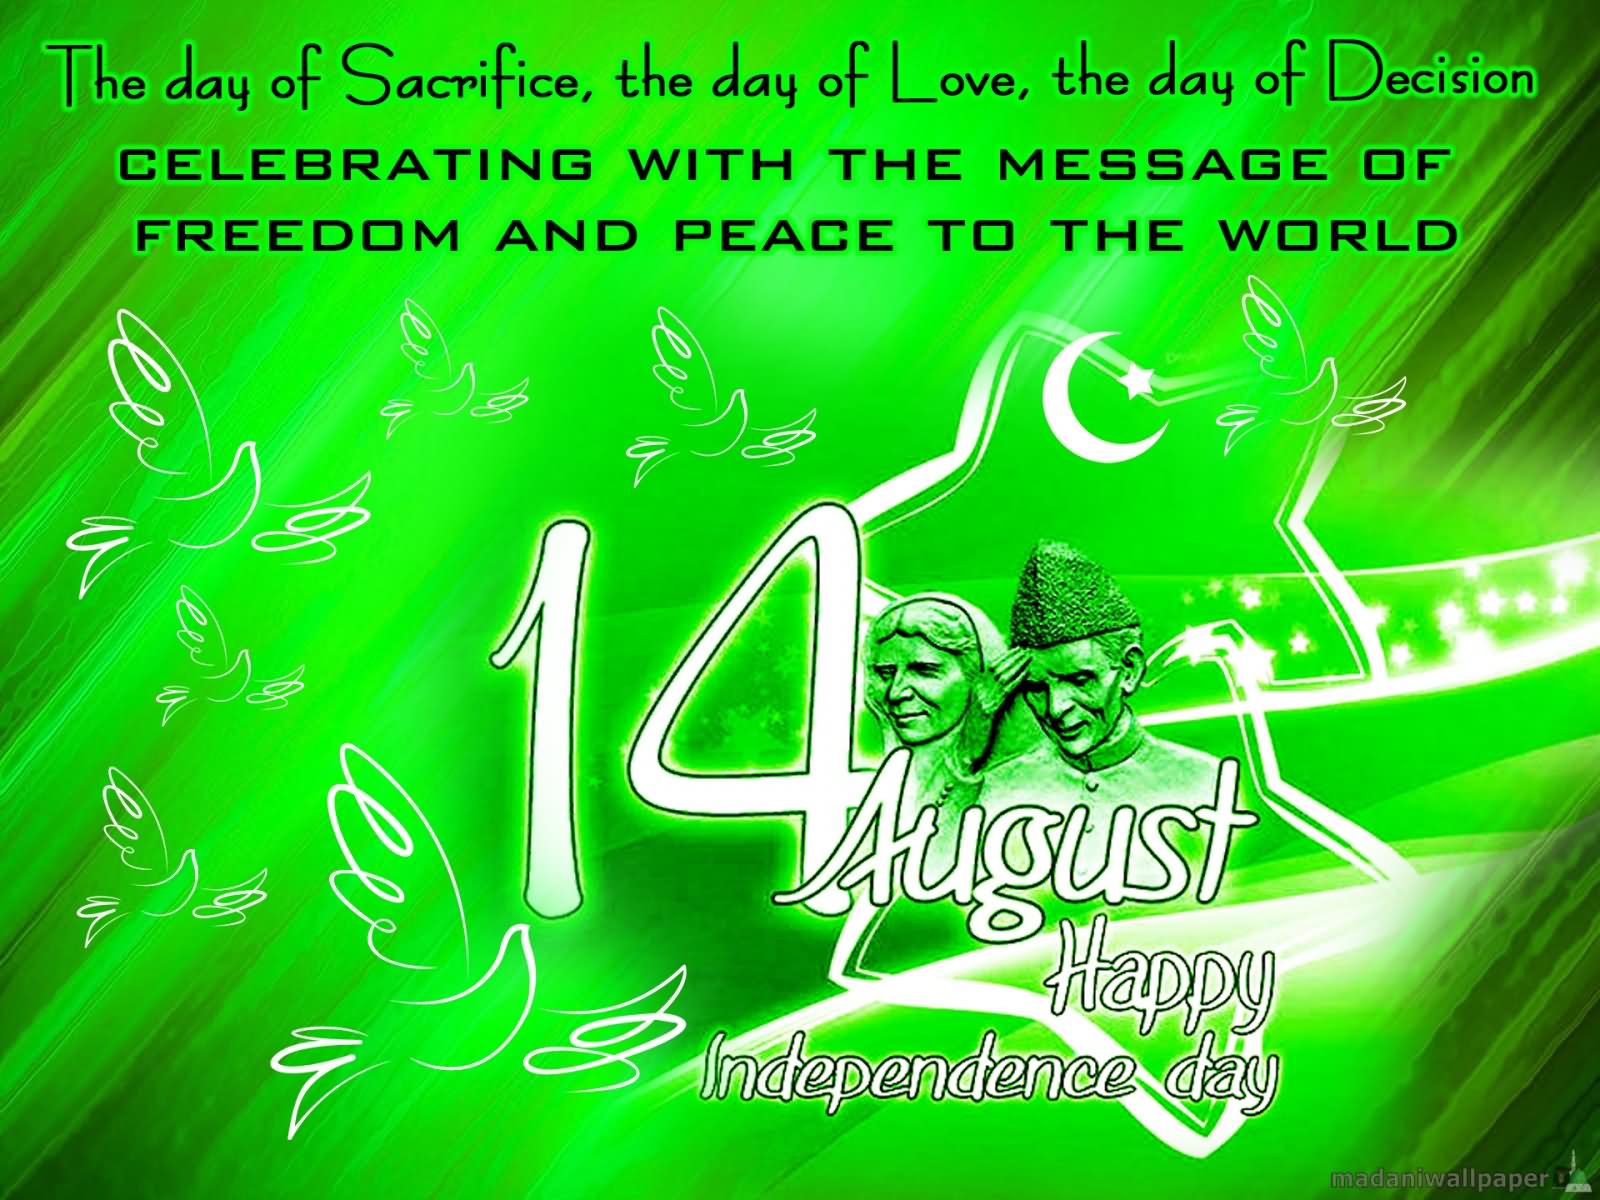 15 Independence Day Love Quotes | Love quotes collection within HD images